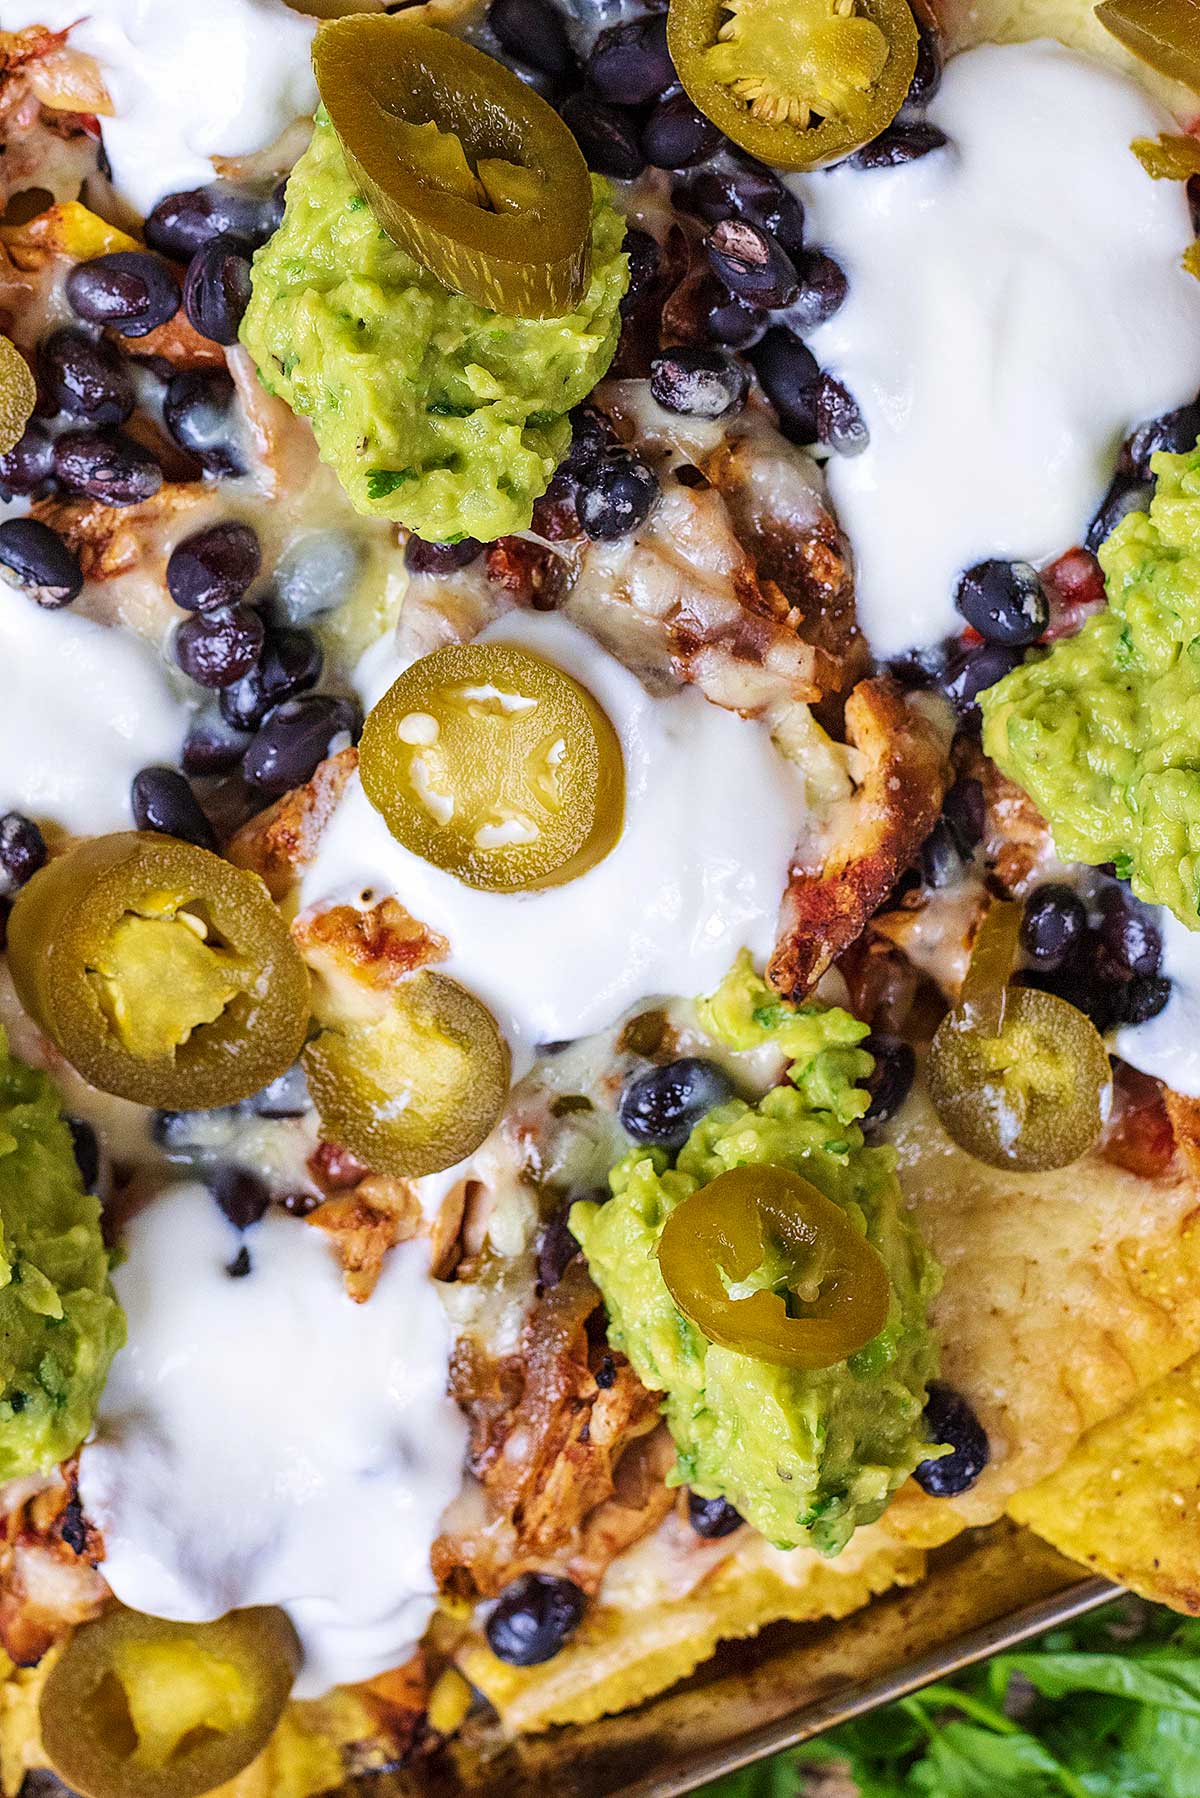 Nachos with chicken and black beans covered in cheese, sour cream and guacamole.